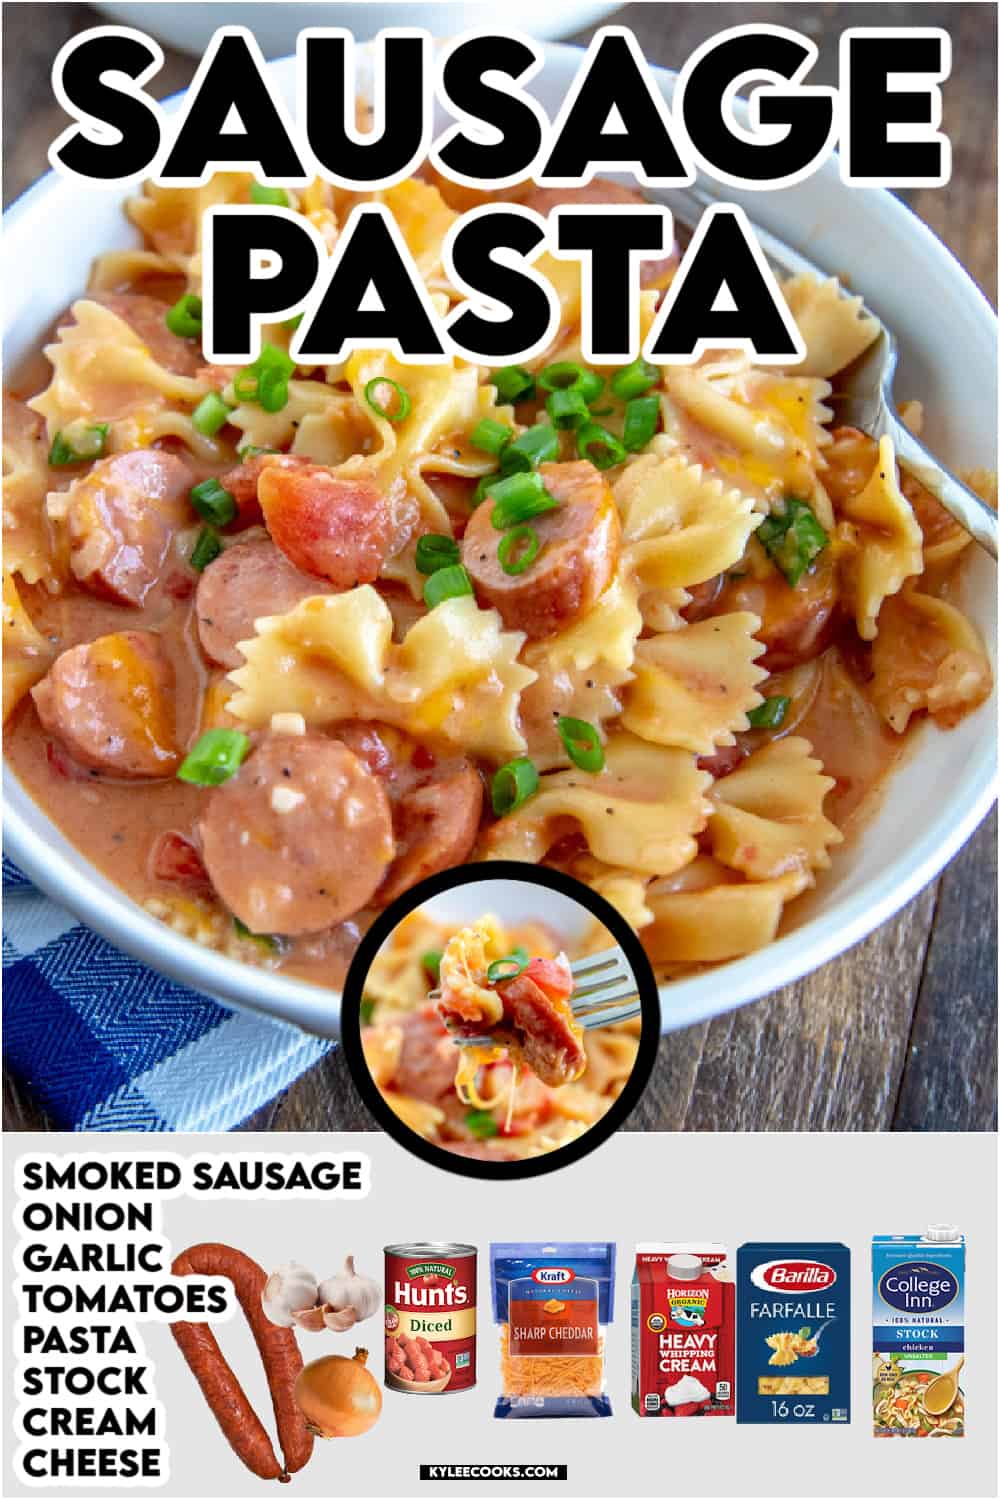 sausage pasta in a bowl with recipe name and ingredients overlaid in text and images.